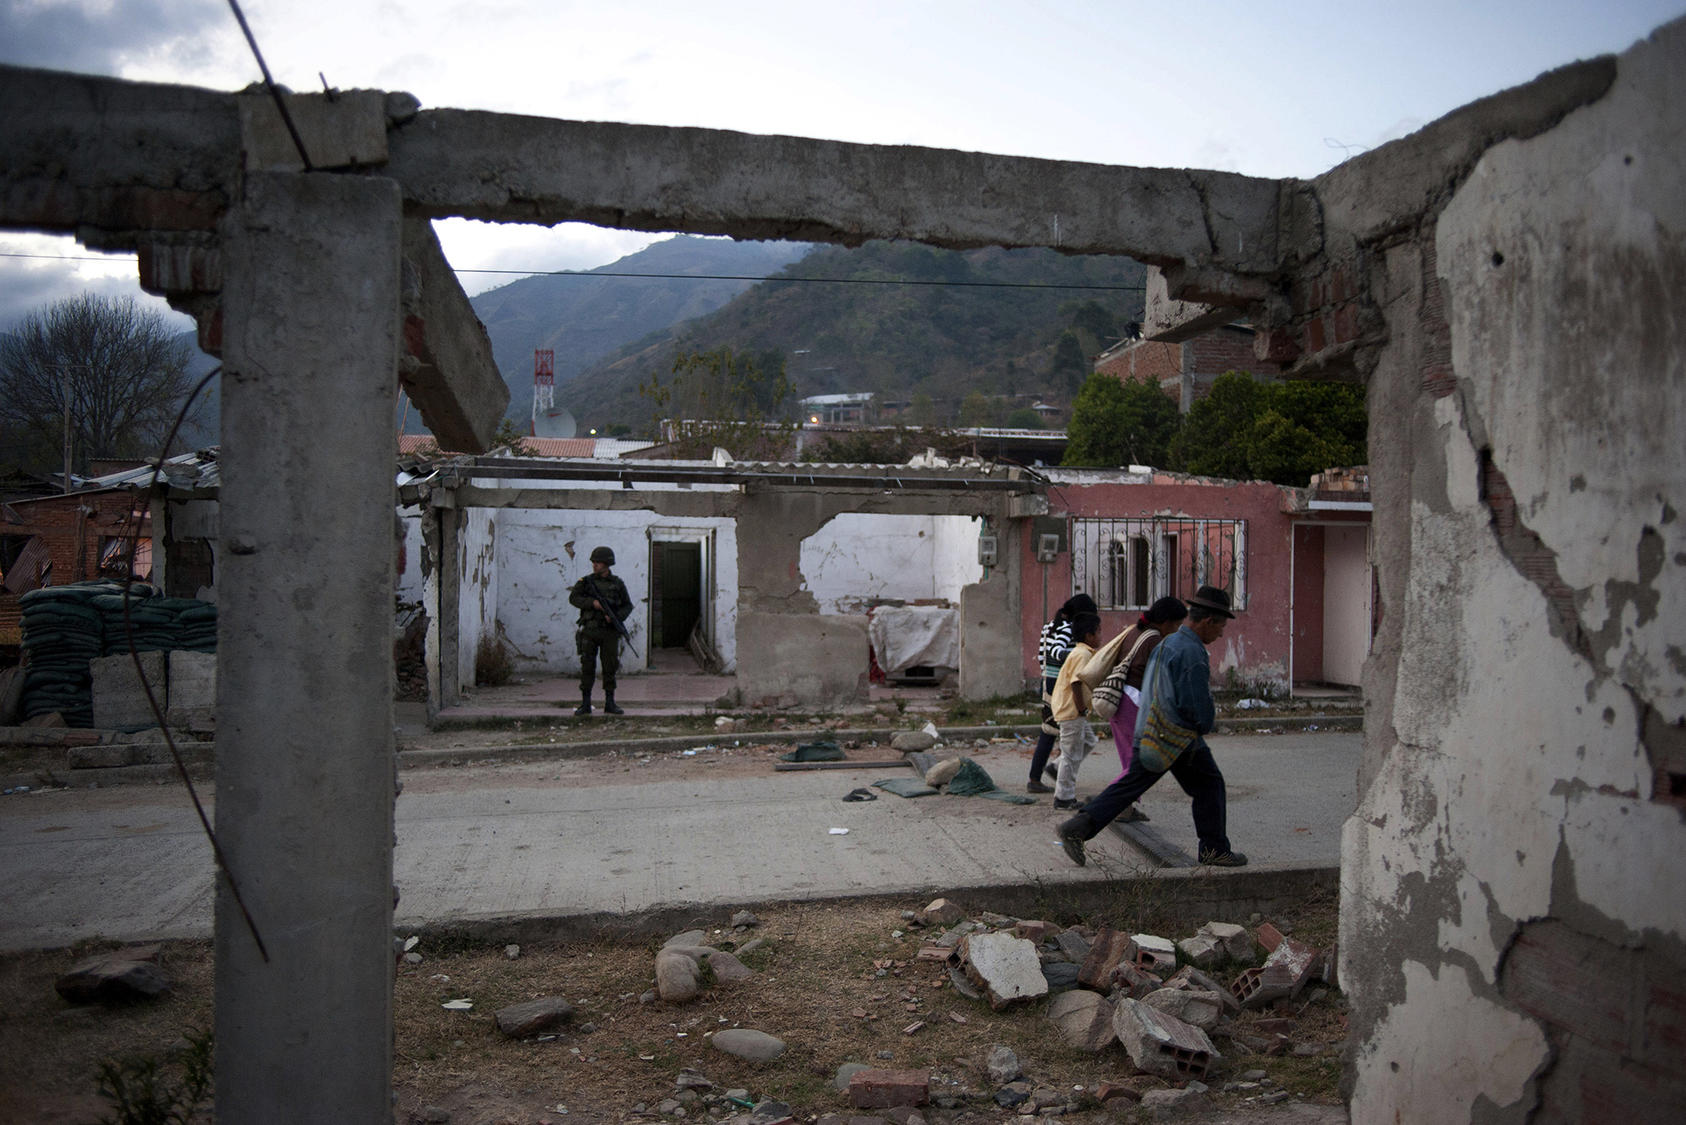 A Colombian soldier watched a street in Toribio, a mountain town in Colombia’s Pacific region, as peace talks began in 2012. Nine years later, the region remains violent, with little government presence in rural areas. (Stephen Ferry/The New York Times)